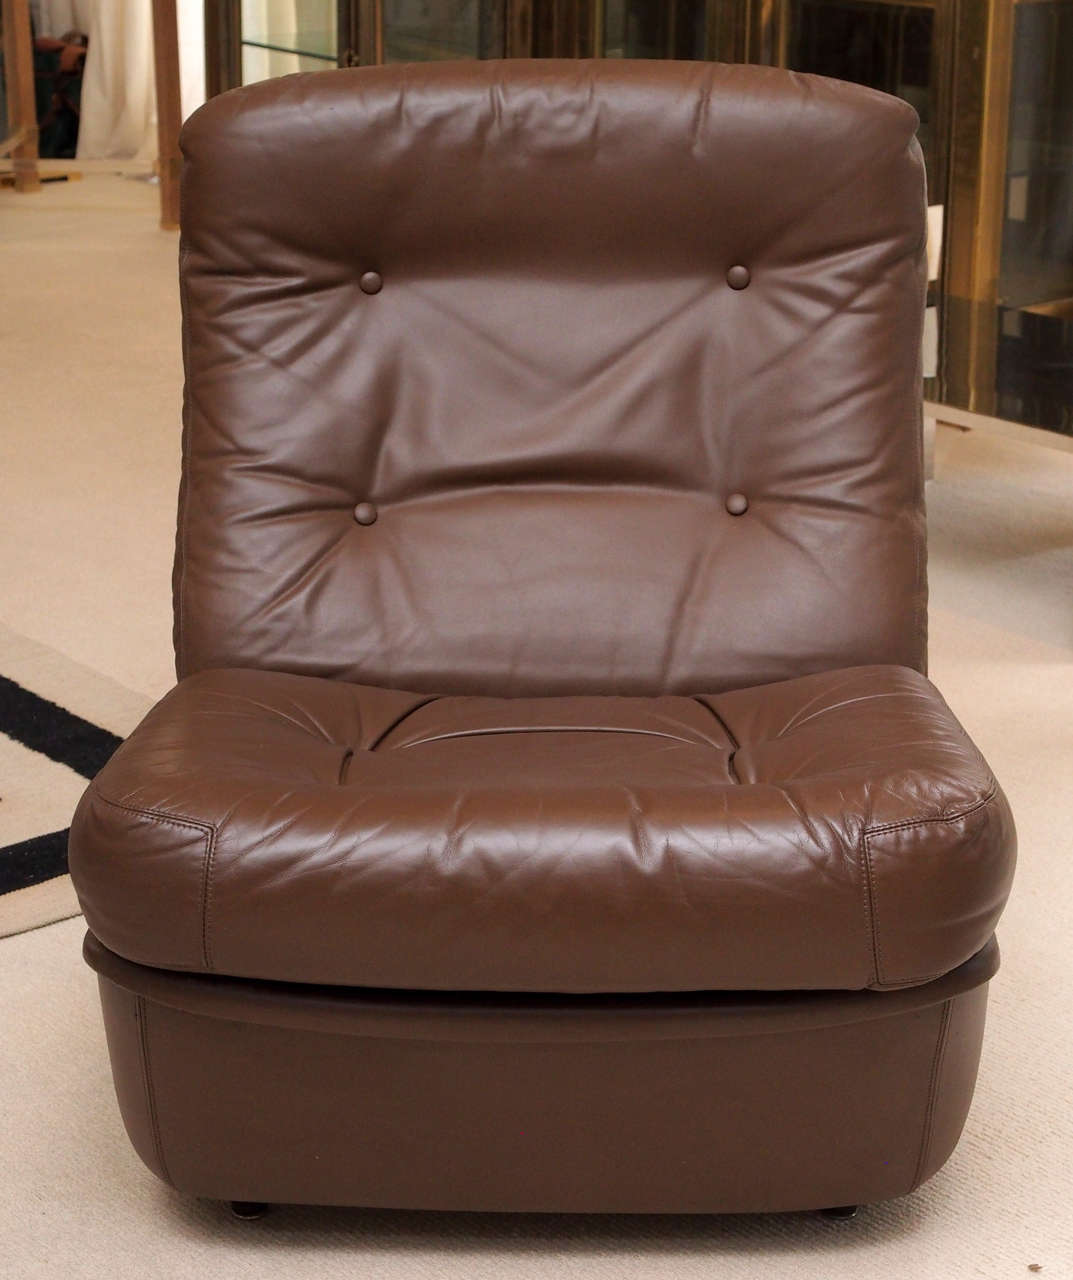 Two low armless lounge chairs by Airborne, so labelled; with tufted cushions, fixed at the back, loose at the seat; casters at the rear; three additional chairs available.